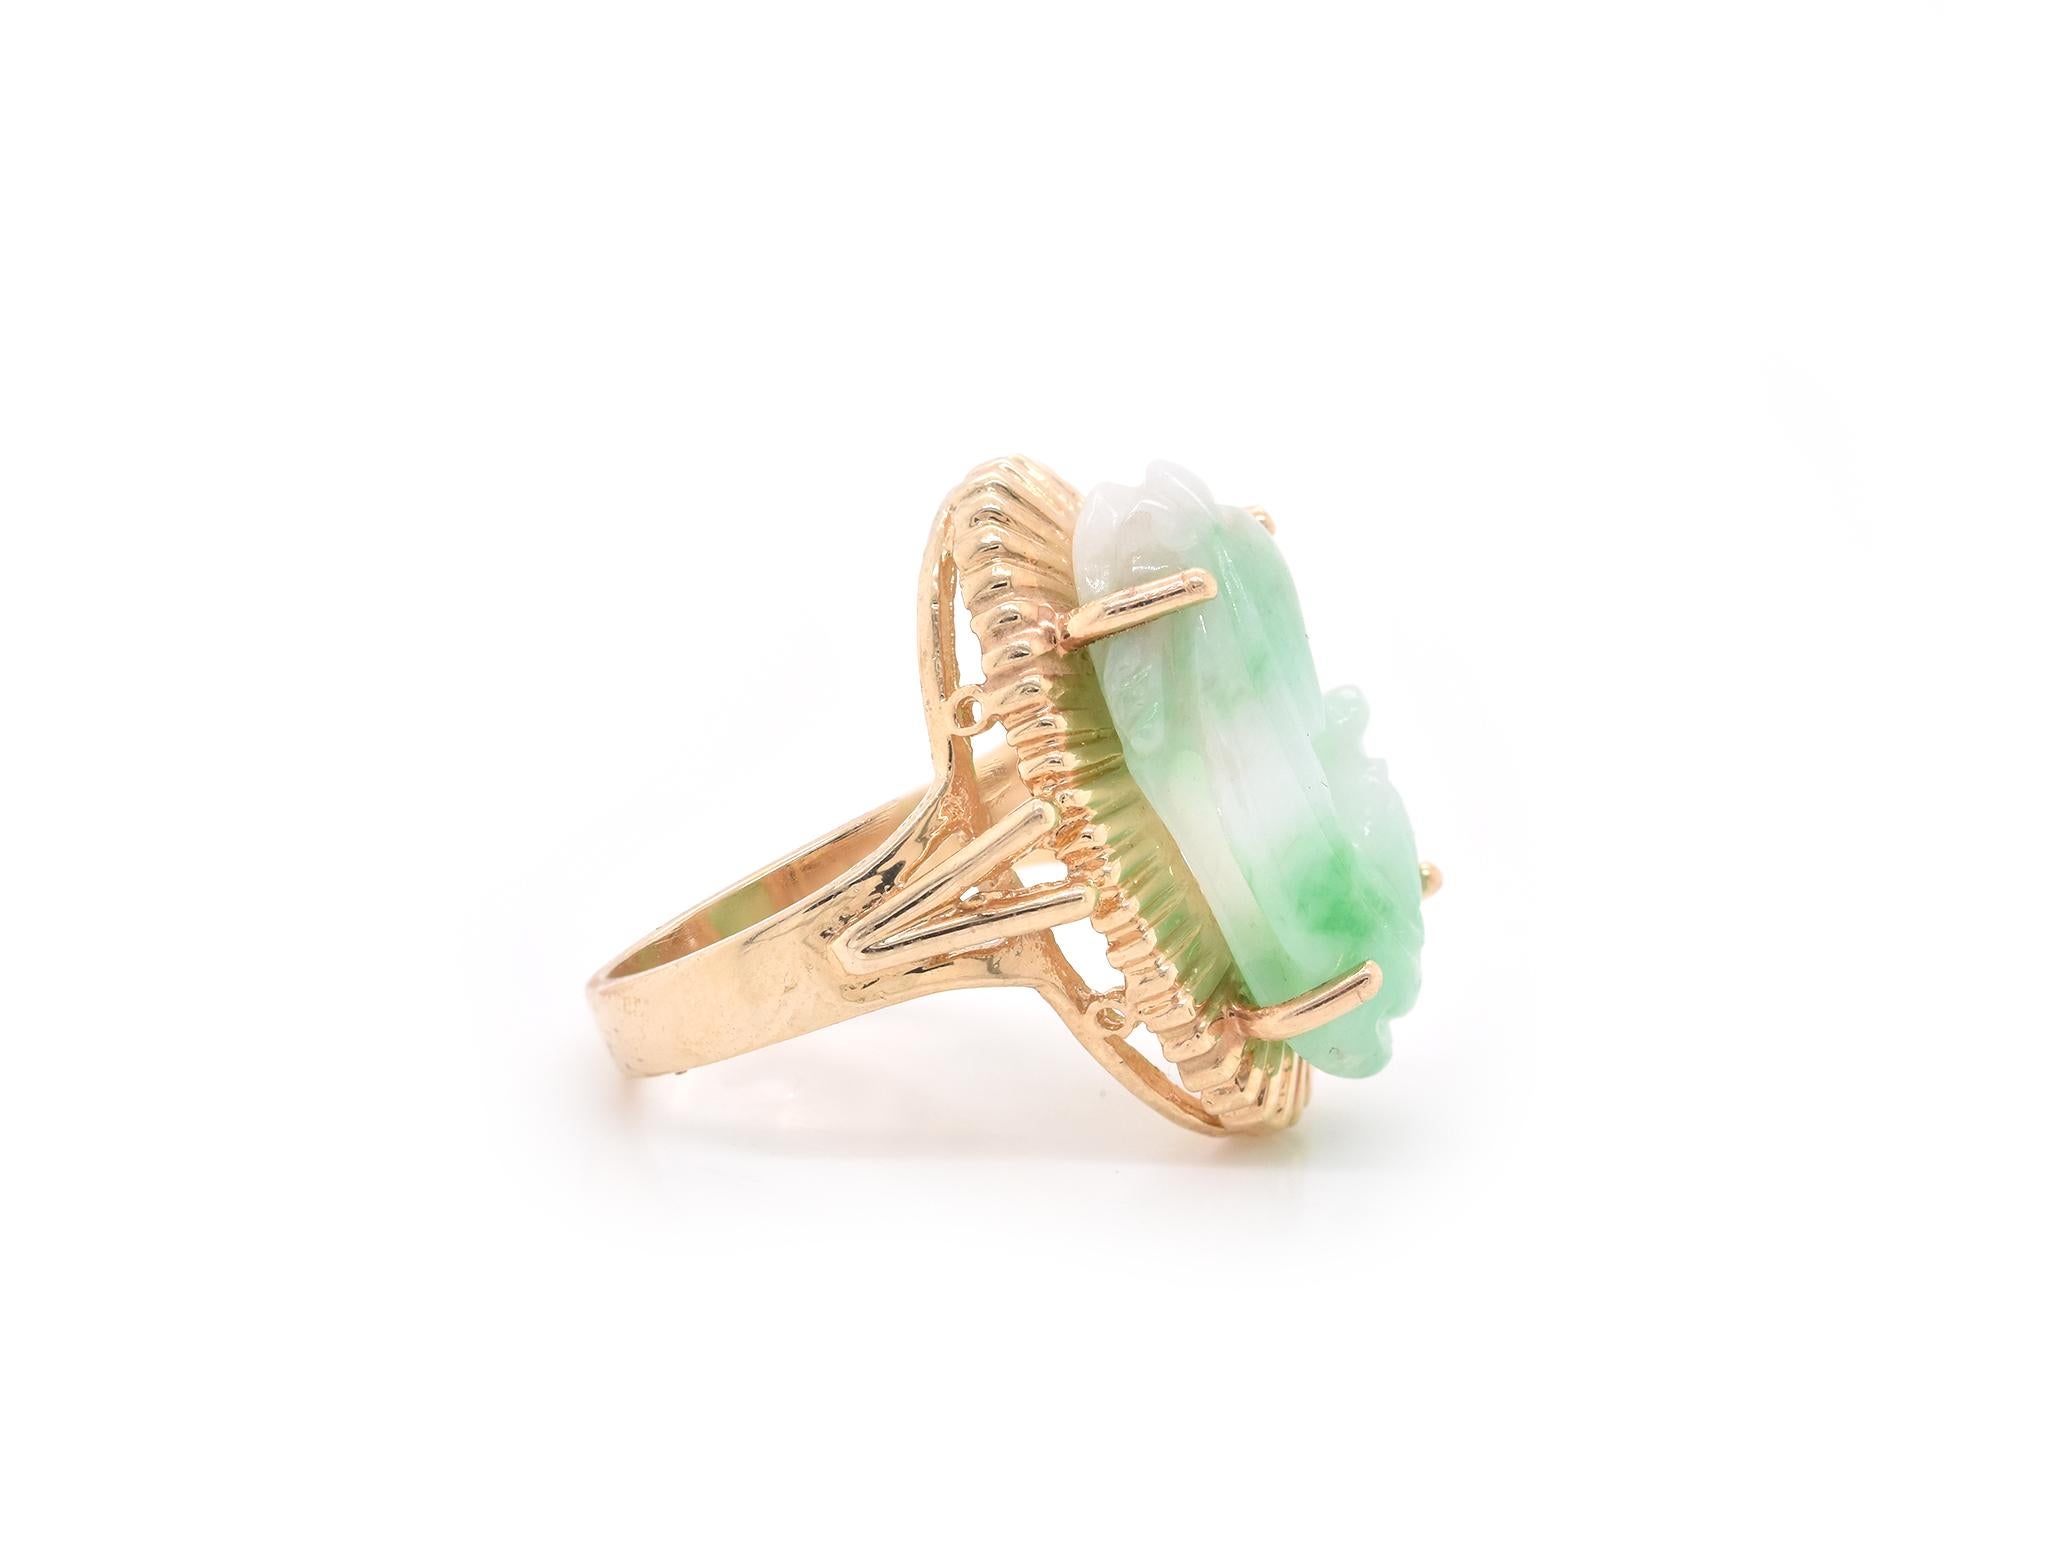 Designer: custom
Material: 14k yellow gold
Jade: 20.50mm x 12.80mm
Ring size: 6 ¼ (please allow two additional shipping days for sizing requests)
Dimensions: ring is approximately 23.05mm x 17.05mm
Weight: 6.86 grams
